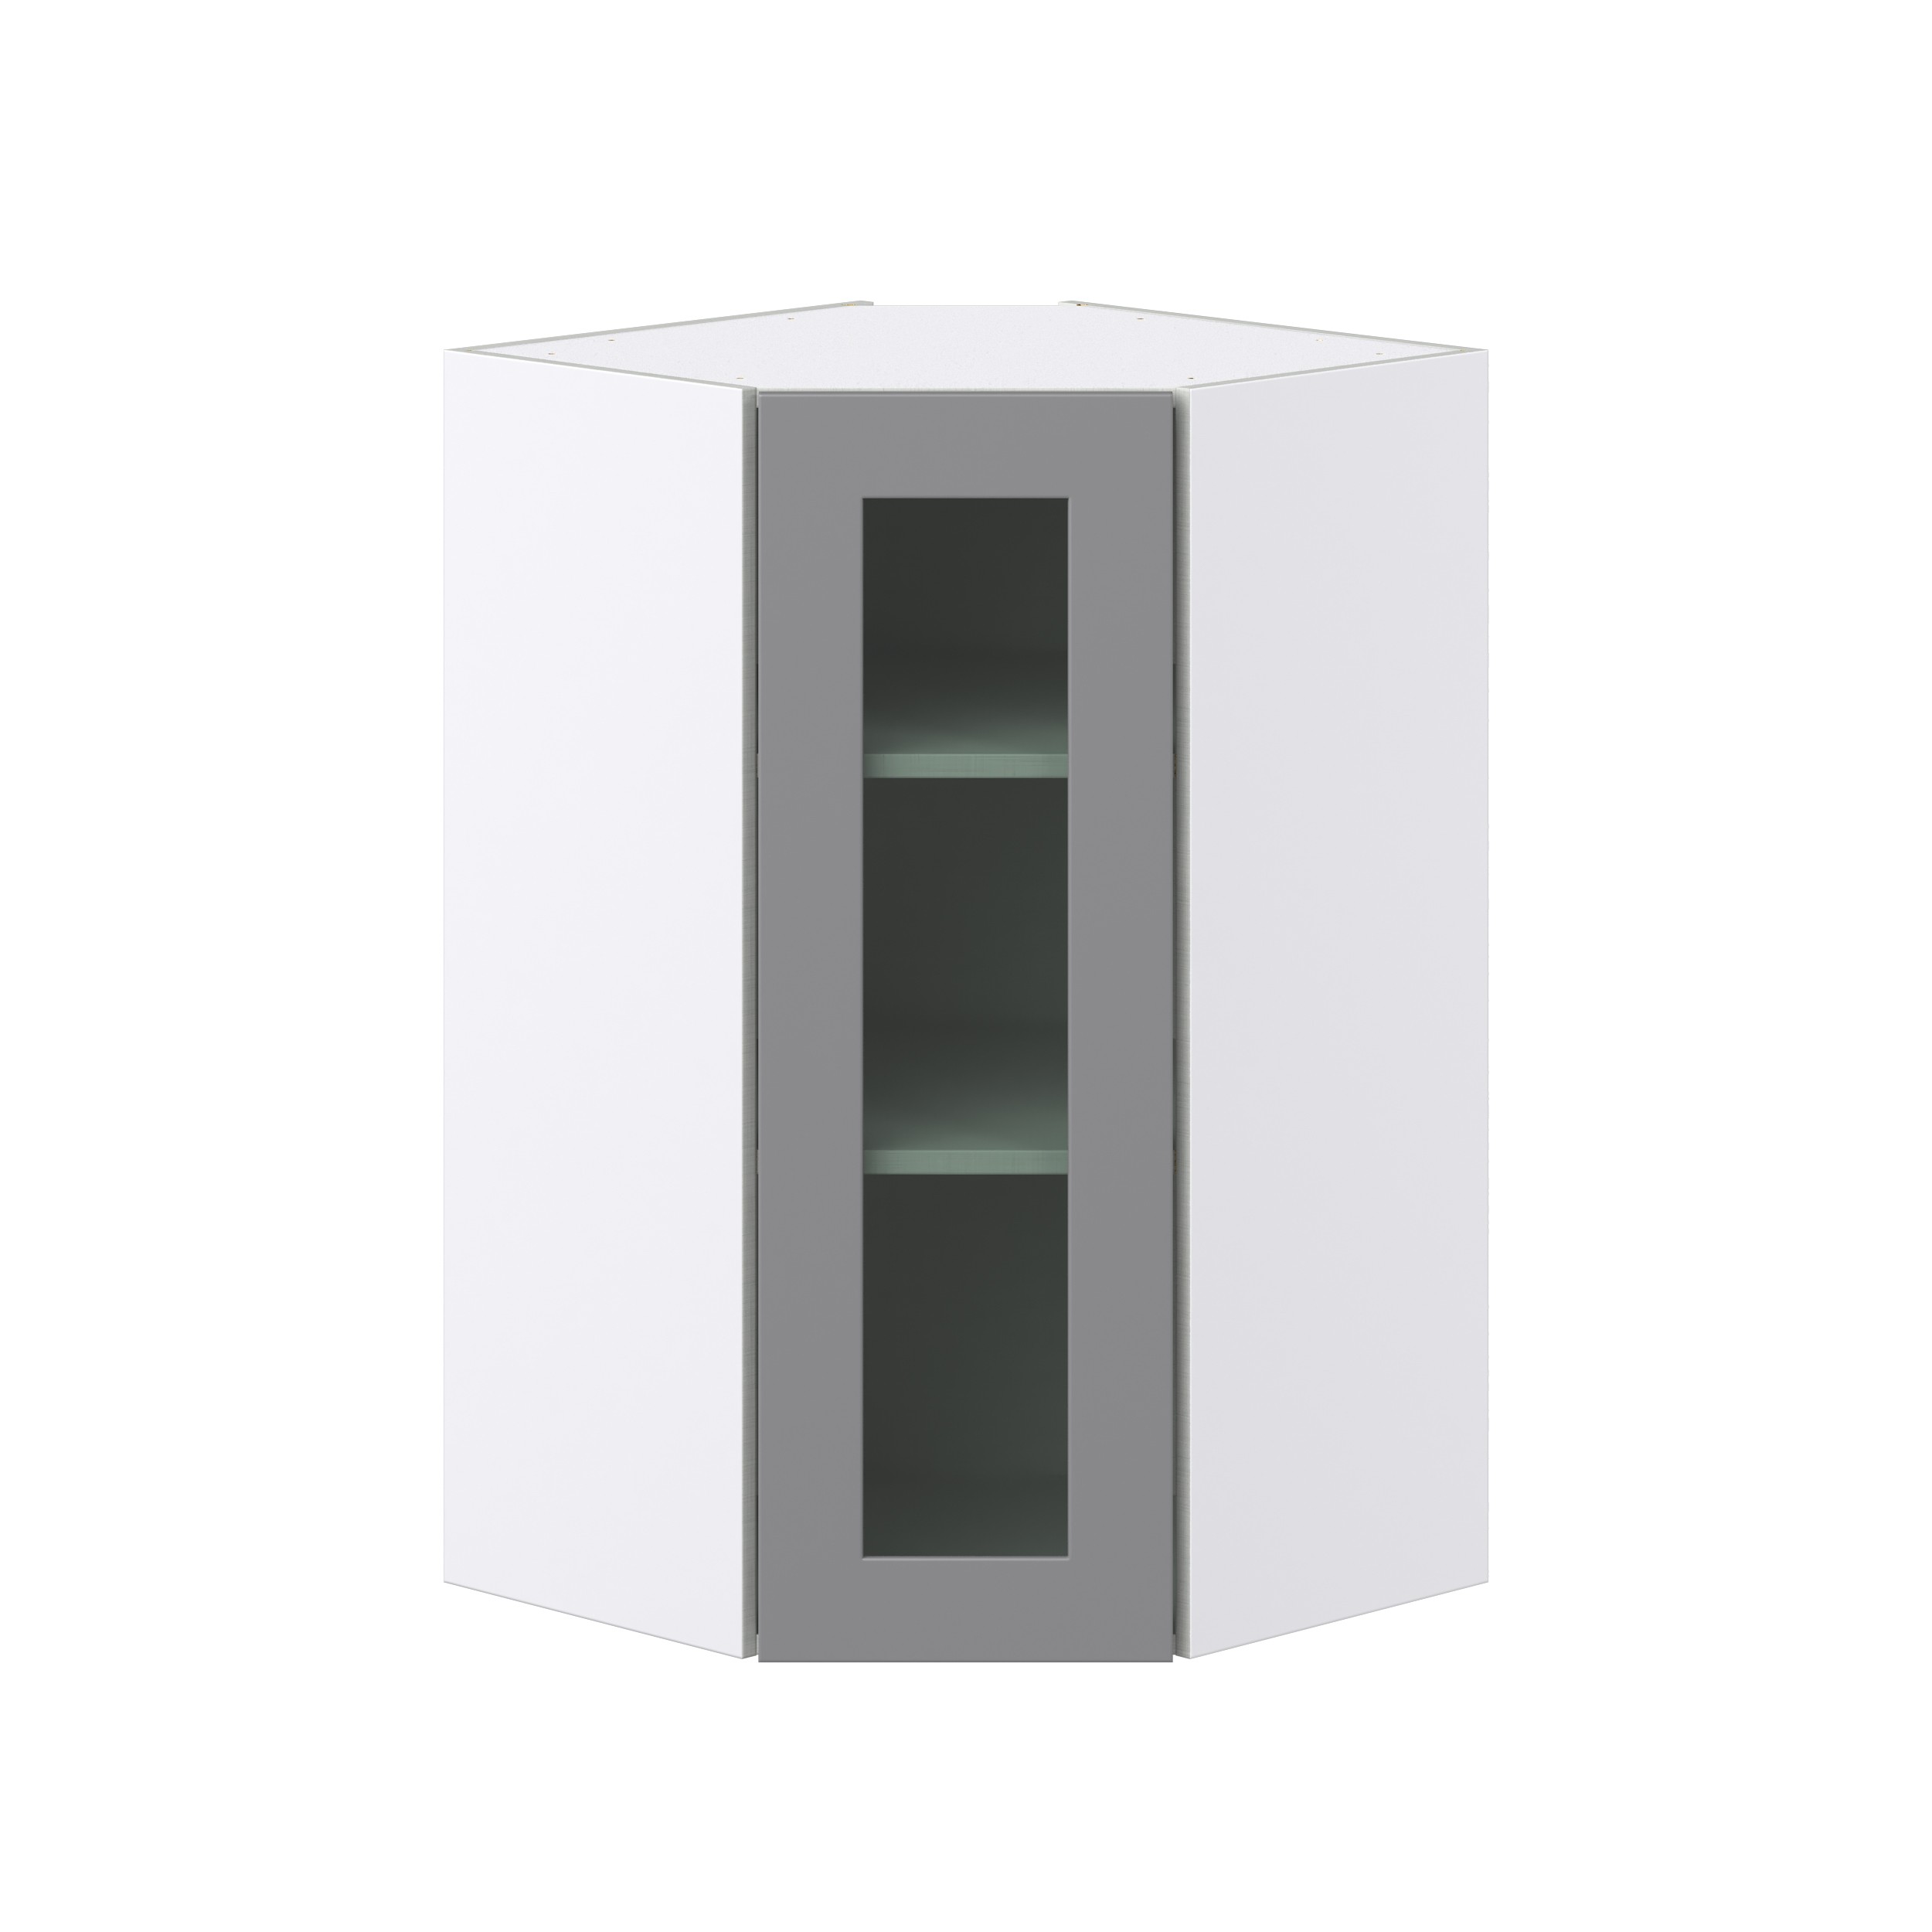 Willow Painted Slate Gray Shaker Assembled Corner Wall Cabinet with a Glass Door (24 in. W x 40 in. H x 24 in. D)